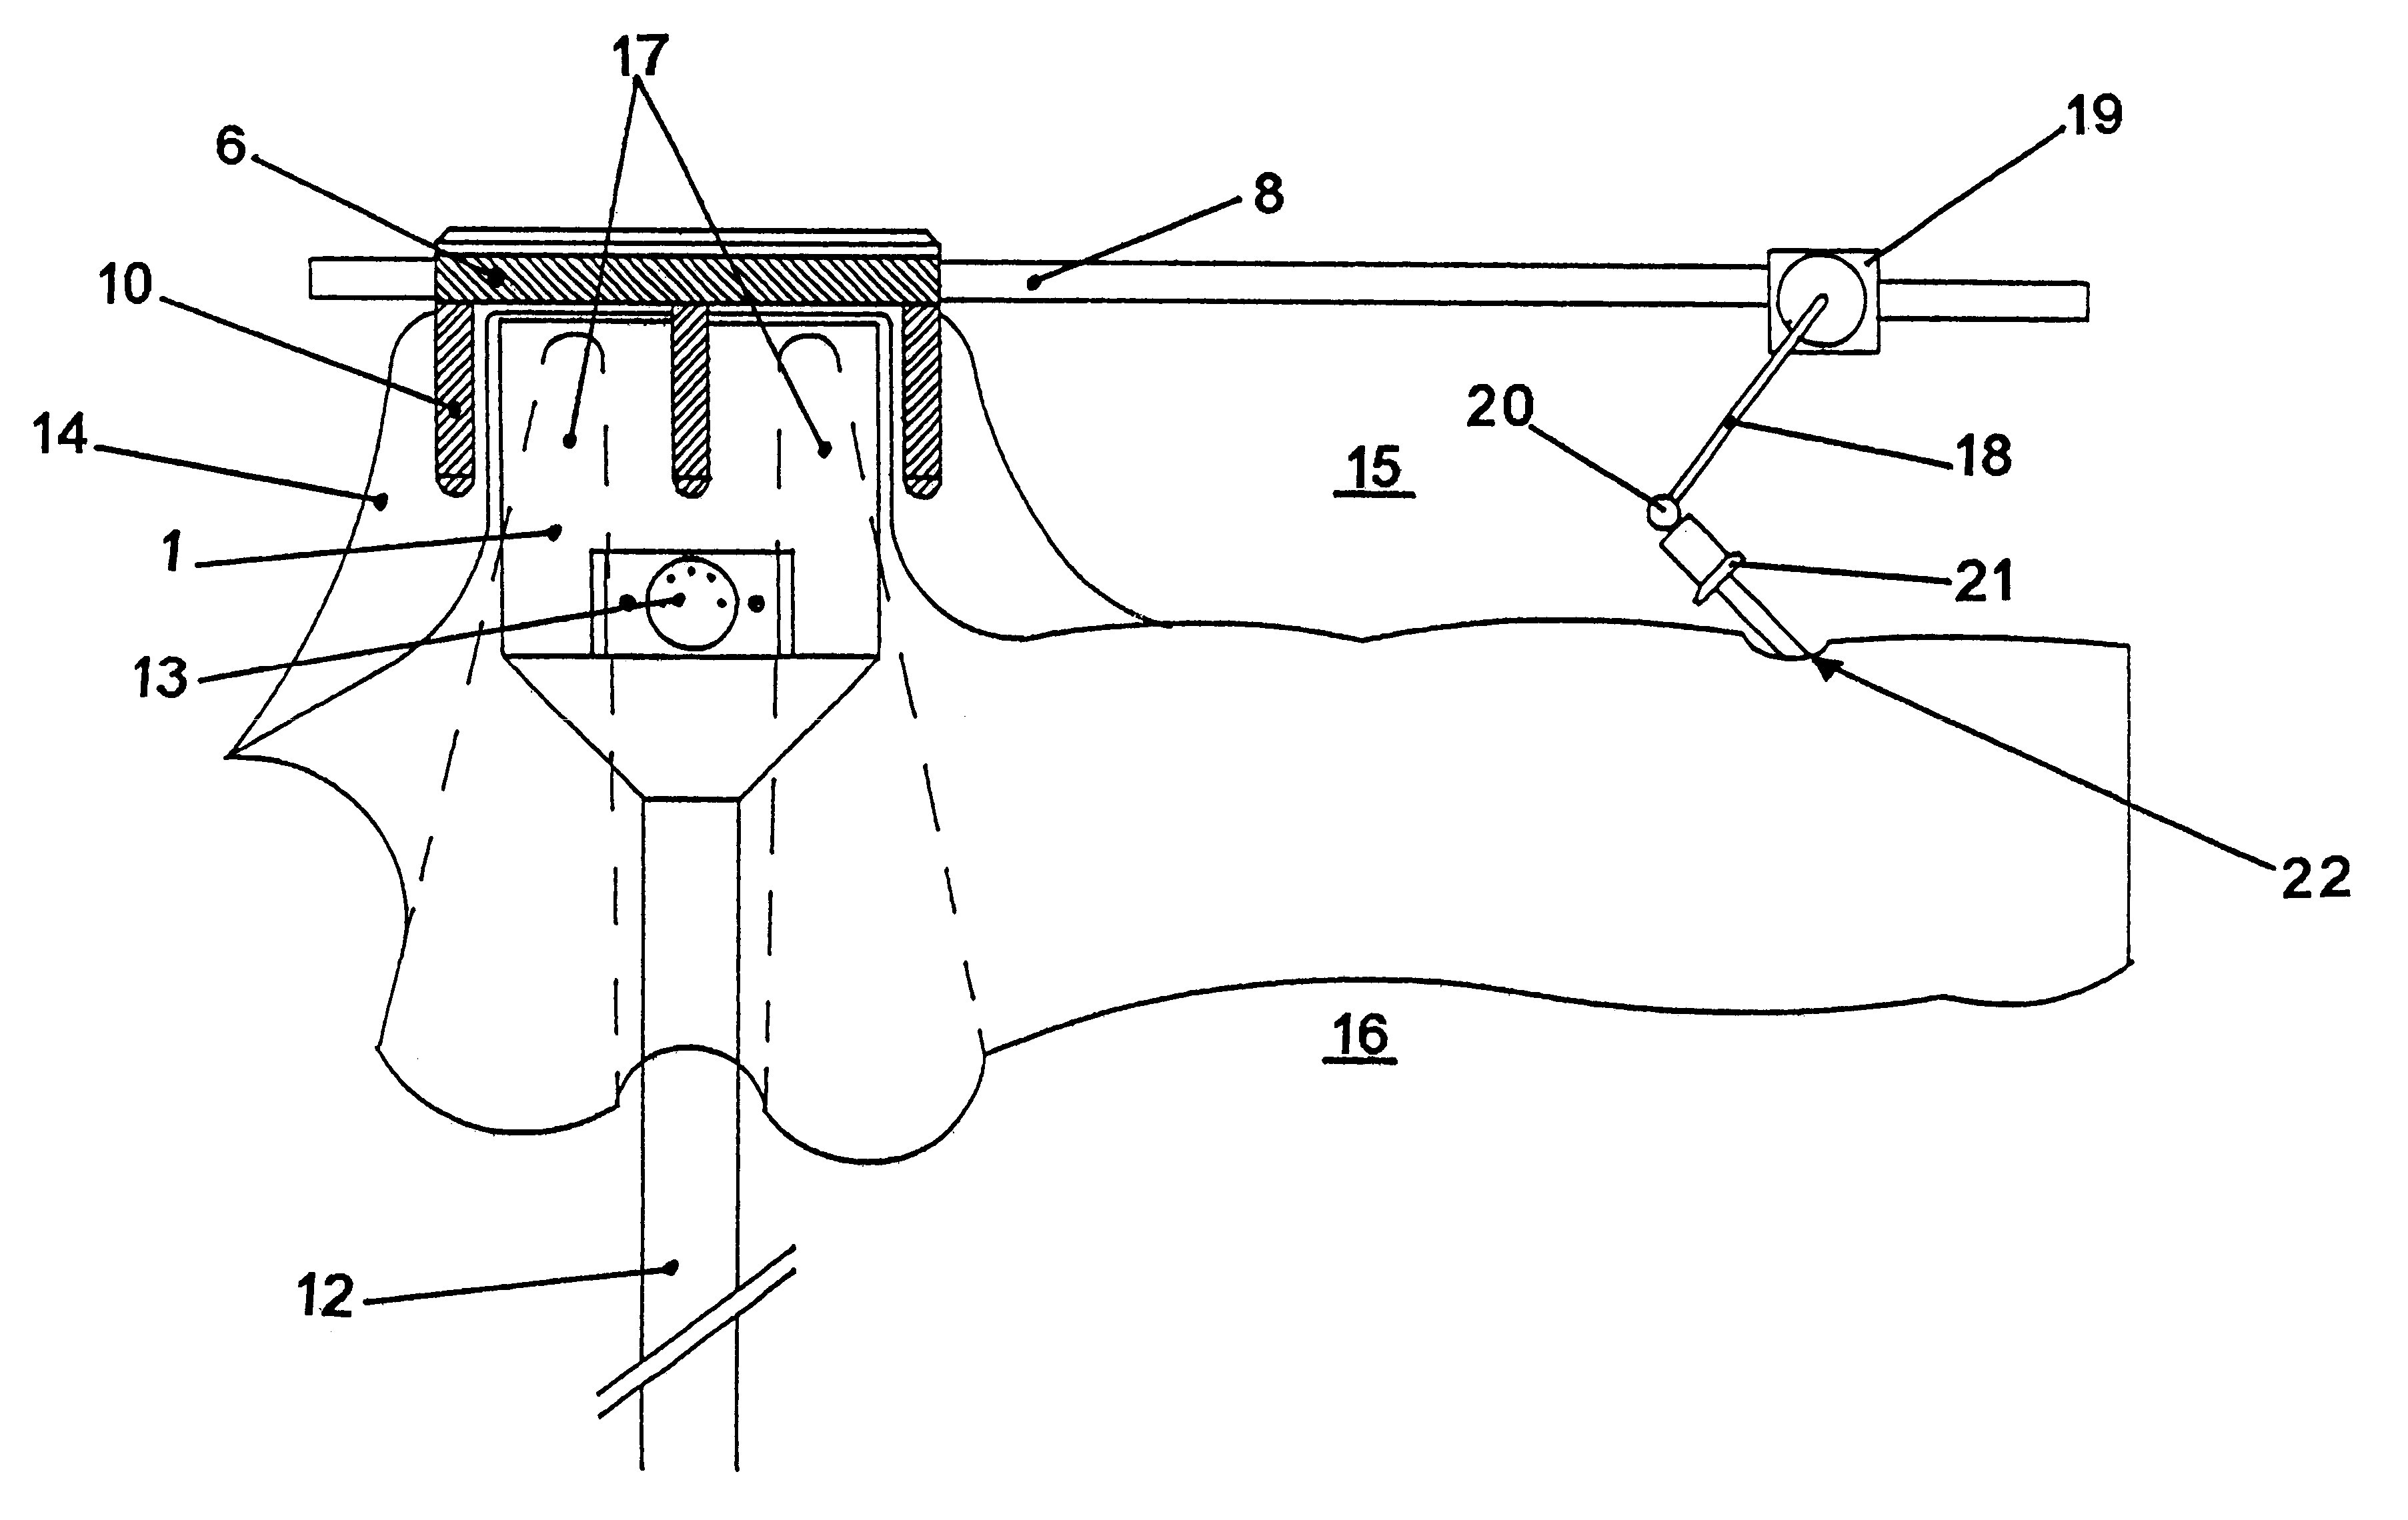 Fixing device for at least one operating element suitable for application in sterile areas in surgical operations, such as a surgical instrument